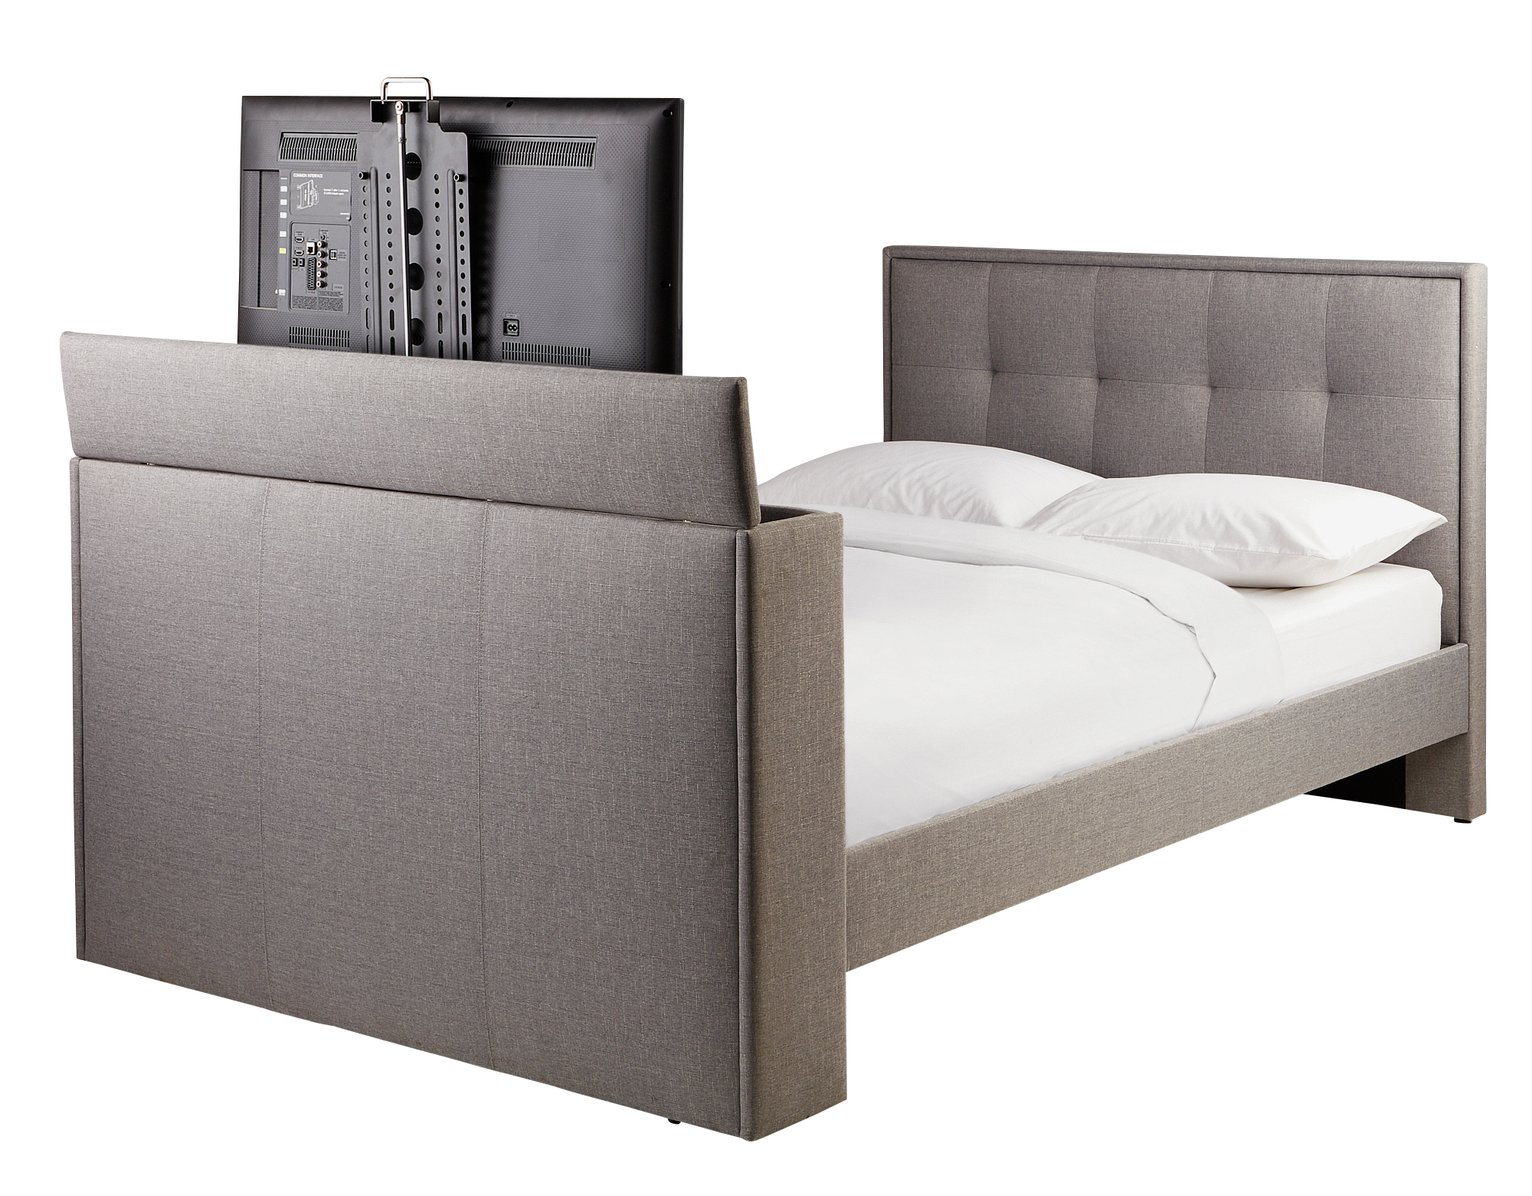 kingsize tv bed with mattress